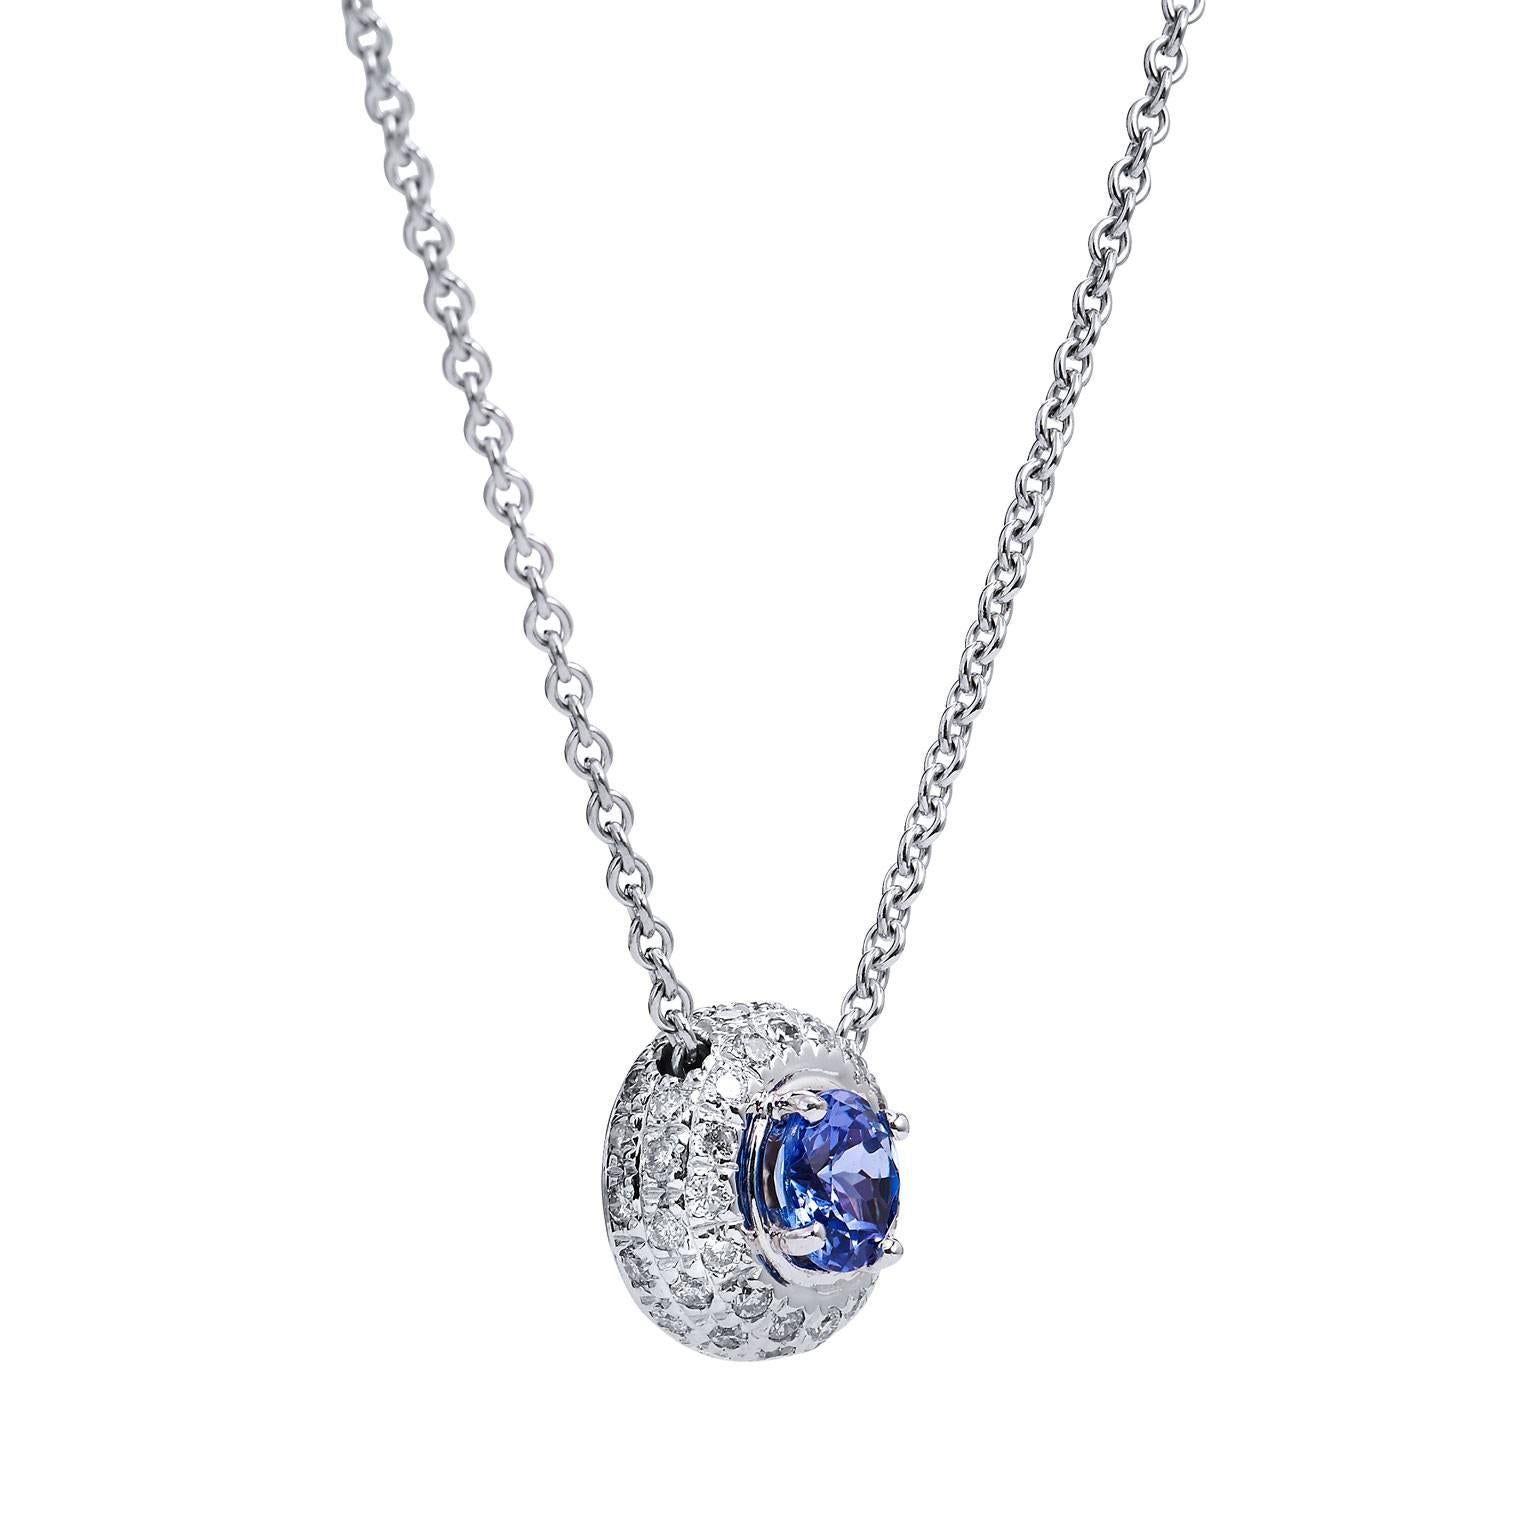 Tanzanite, a gemstone that is likened to that of sapphire, blue topaz, and aquamarine with its stunning hues of blue. Enjoy this previously loved 14 karat white gold pendant featuring a 0.75 carat violet-blue tanzanite bezel set at center